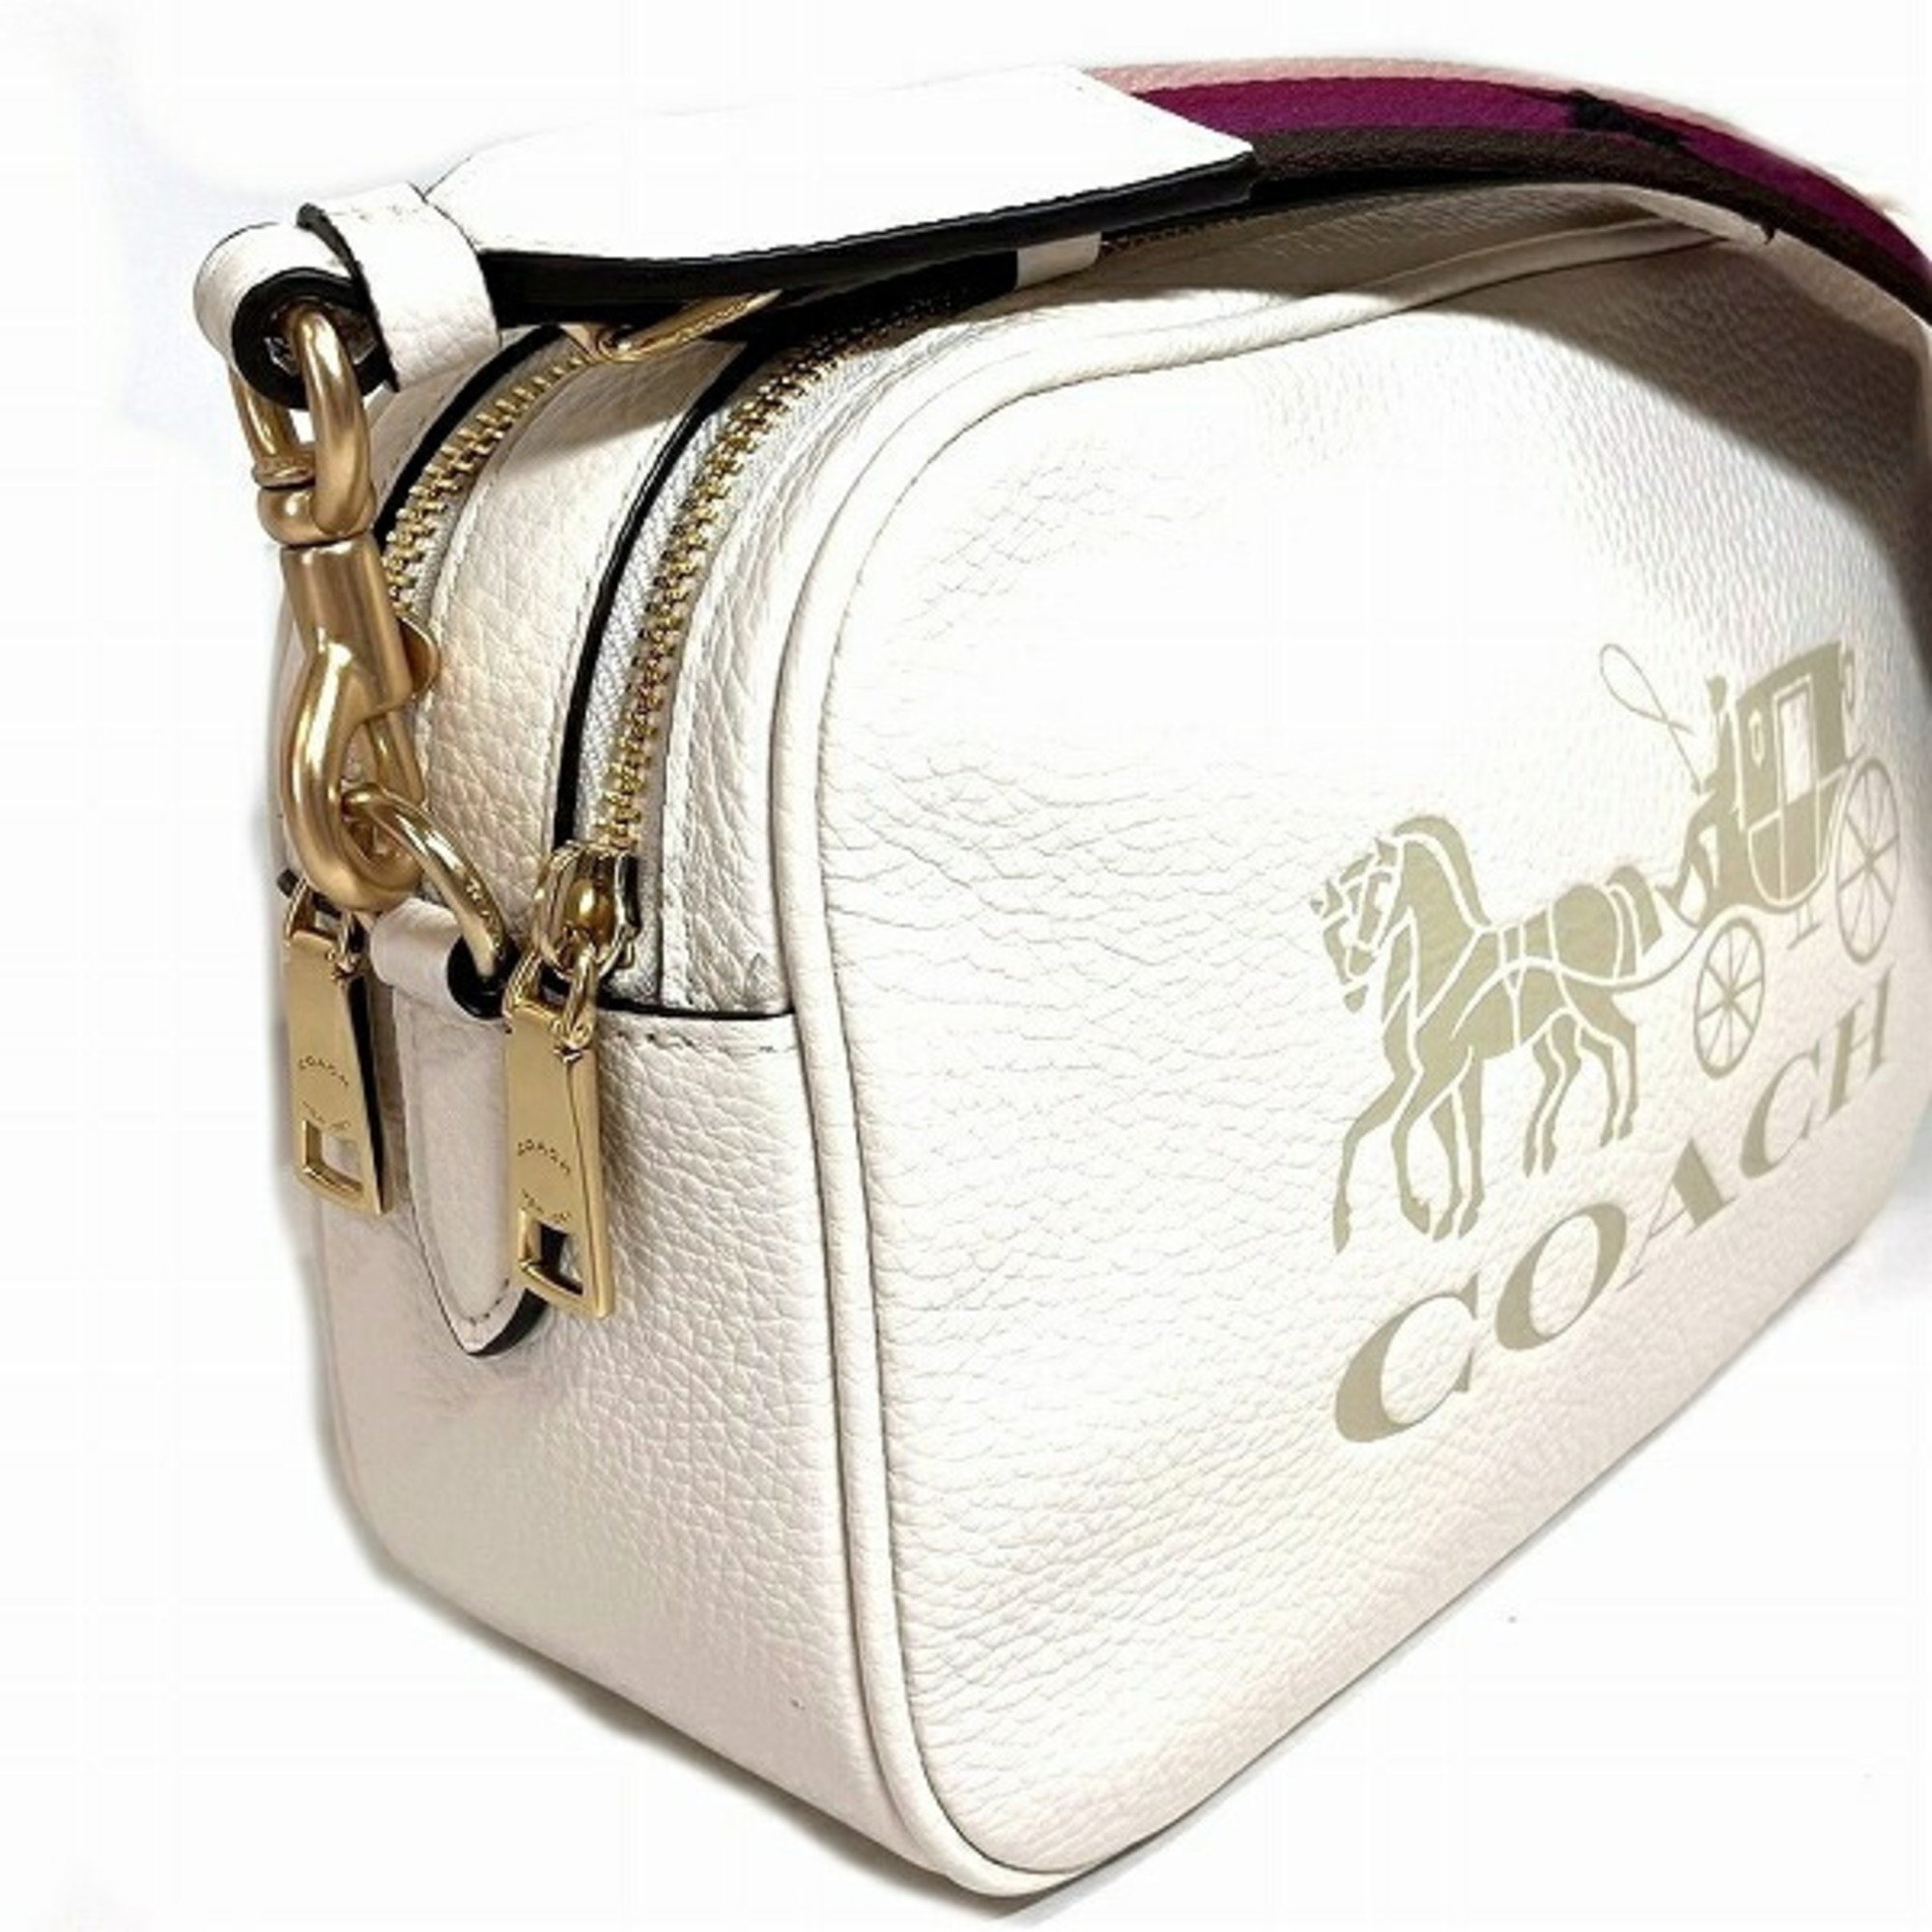 Coach COACH horse and carriage F75818 bag shoulder ladies